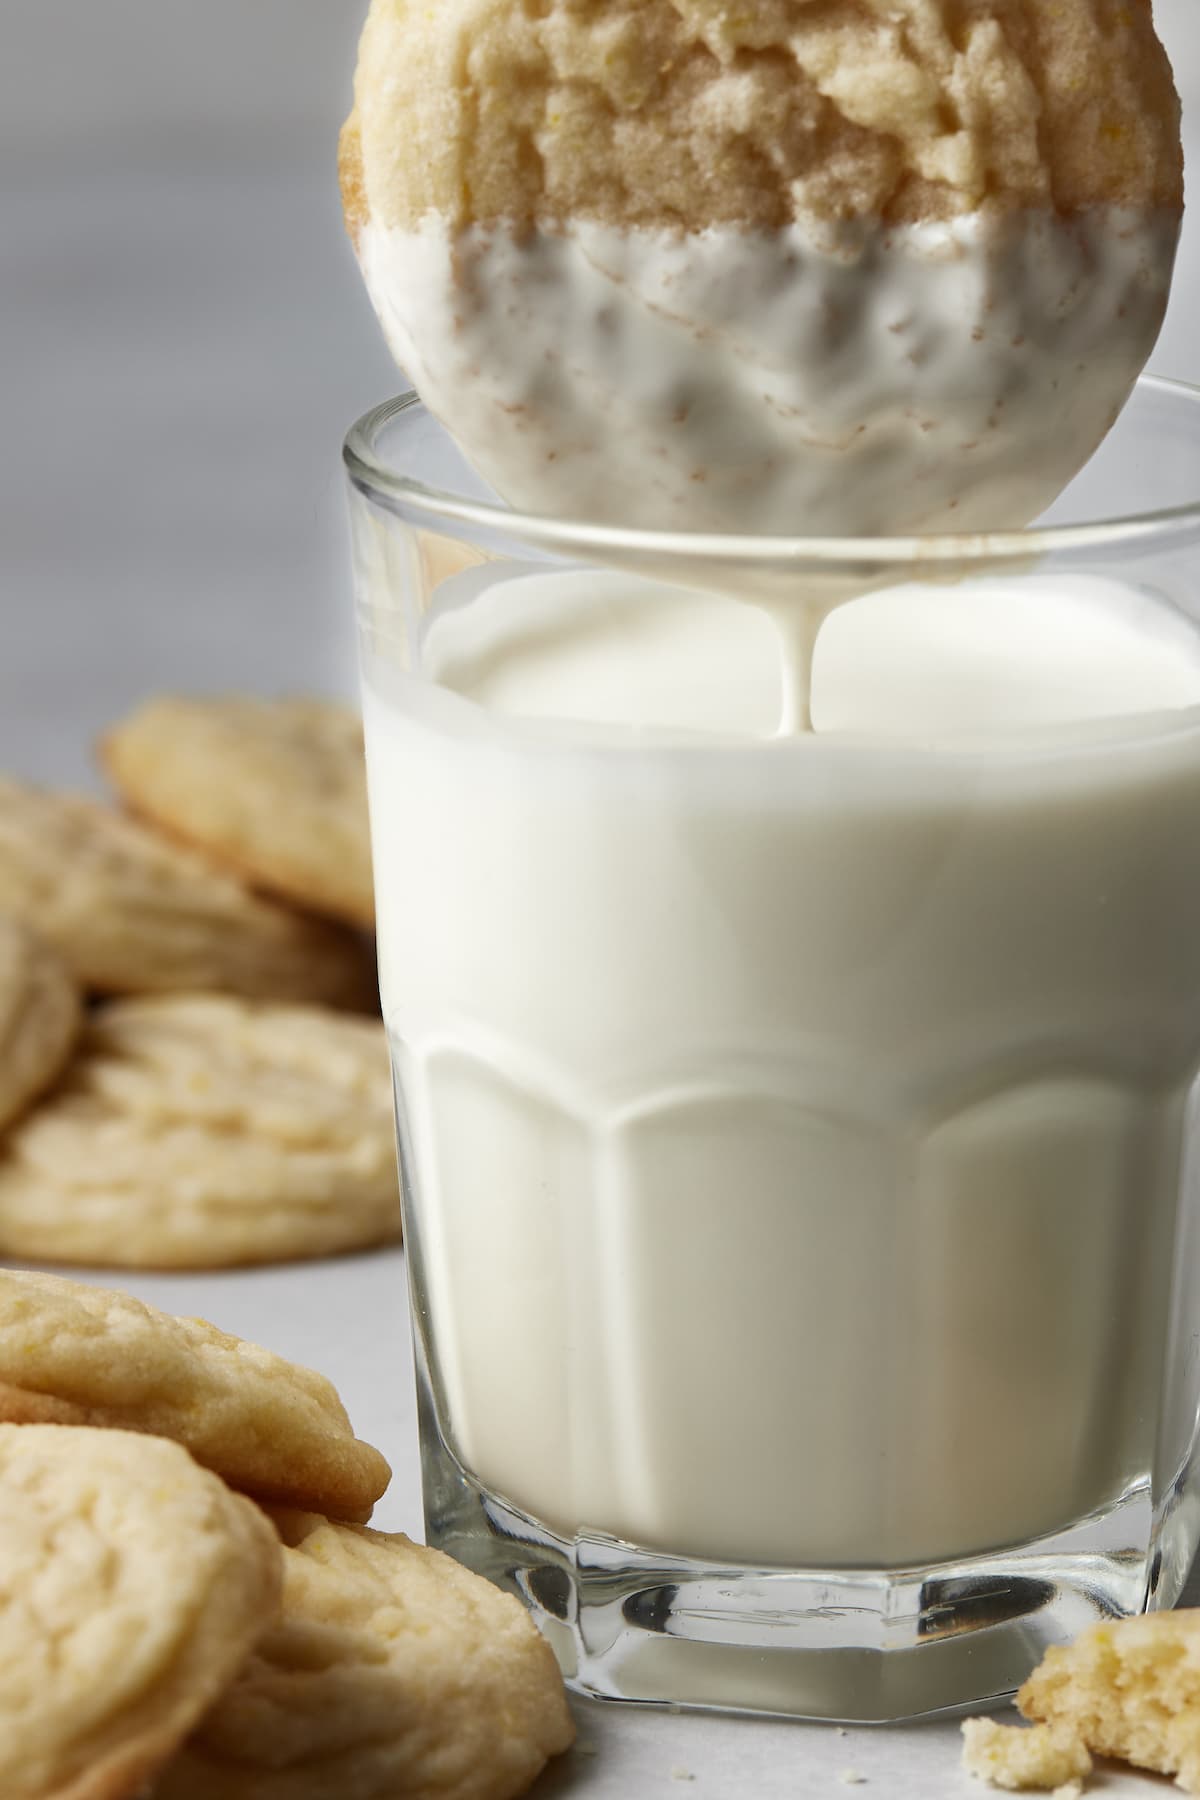 A sugar cookie is dunked into a glass of milk.